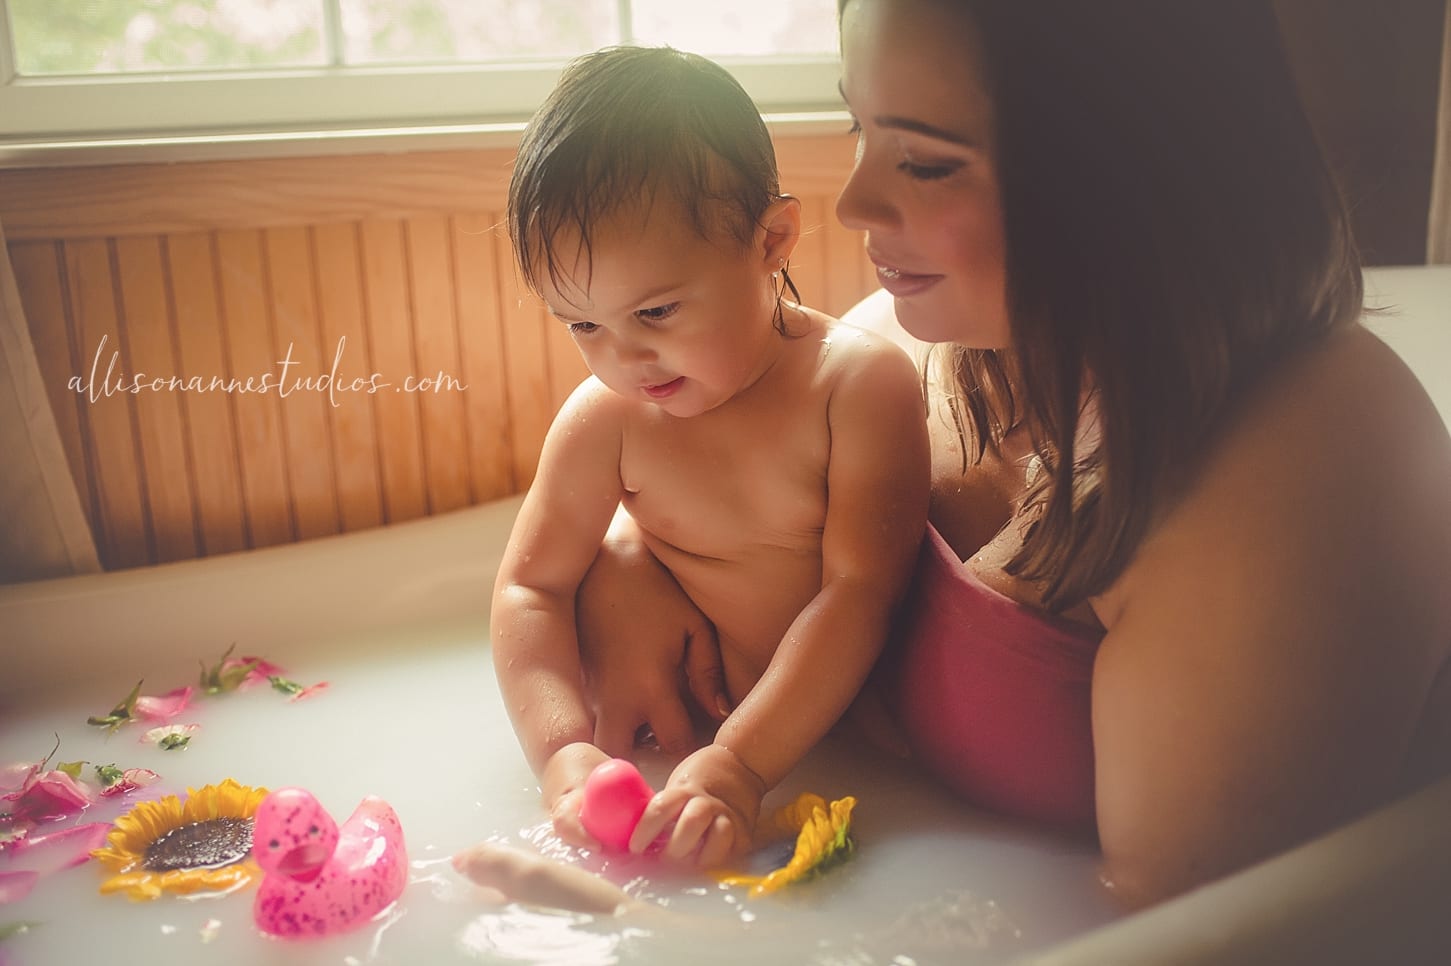 Amanda, AllisonAnne Studios, Allison Gallagher, love, Hammonton, luxe hues, mommy time, powdered milk, sunflowers, rose petals, fun in the clawfoot, sweet moments